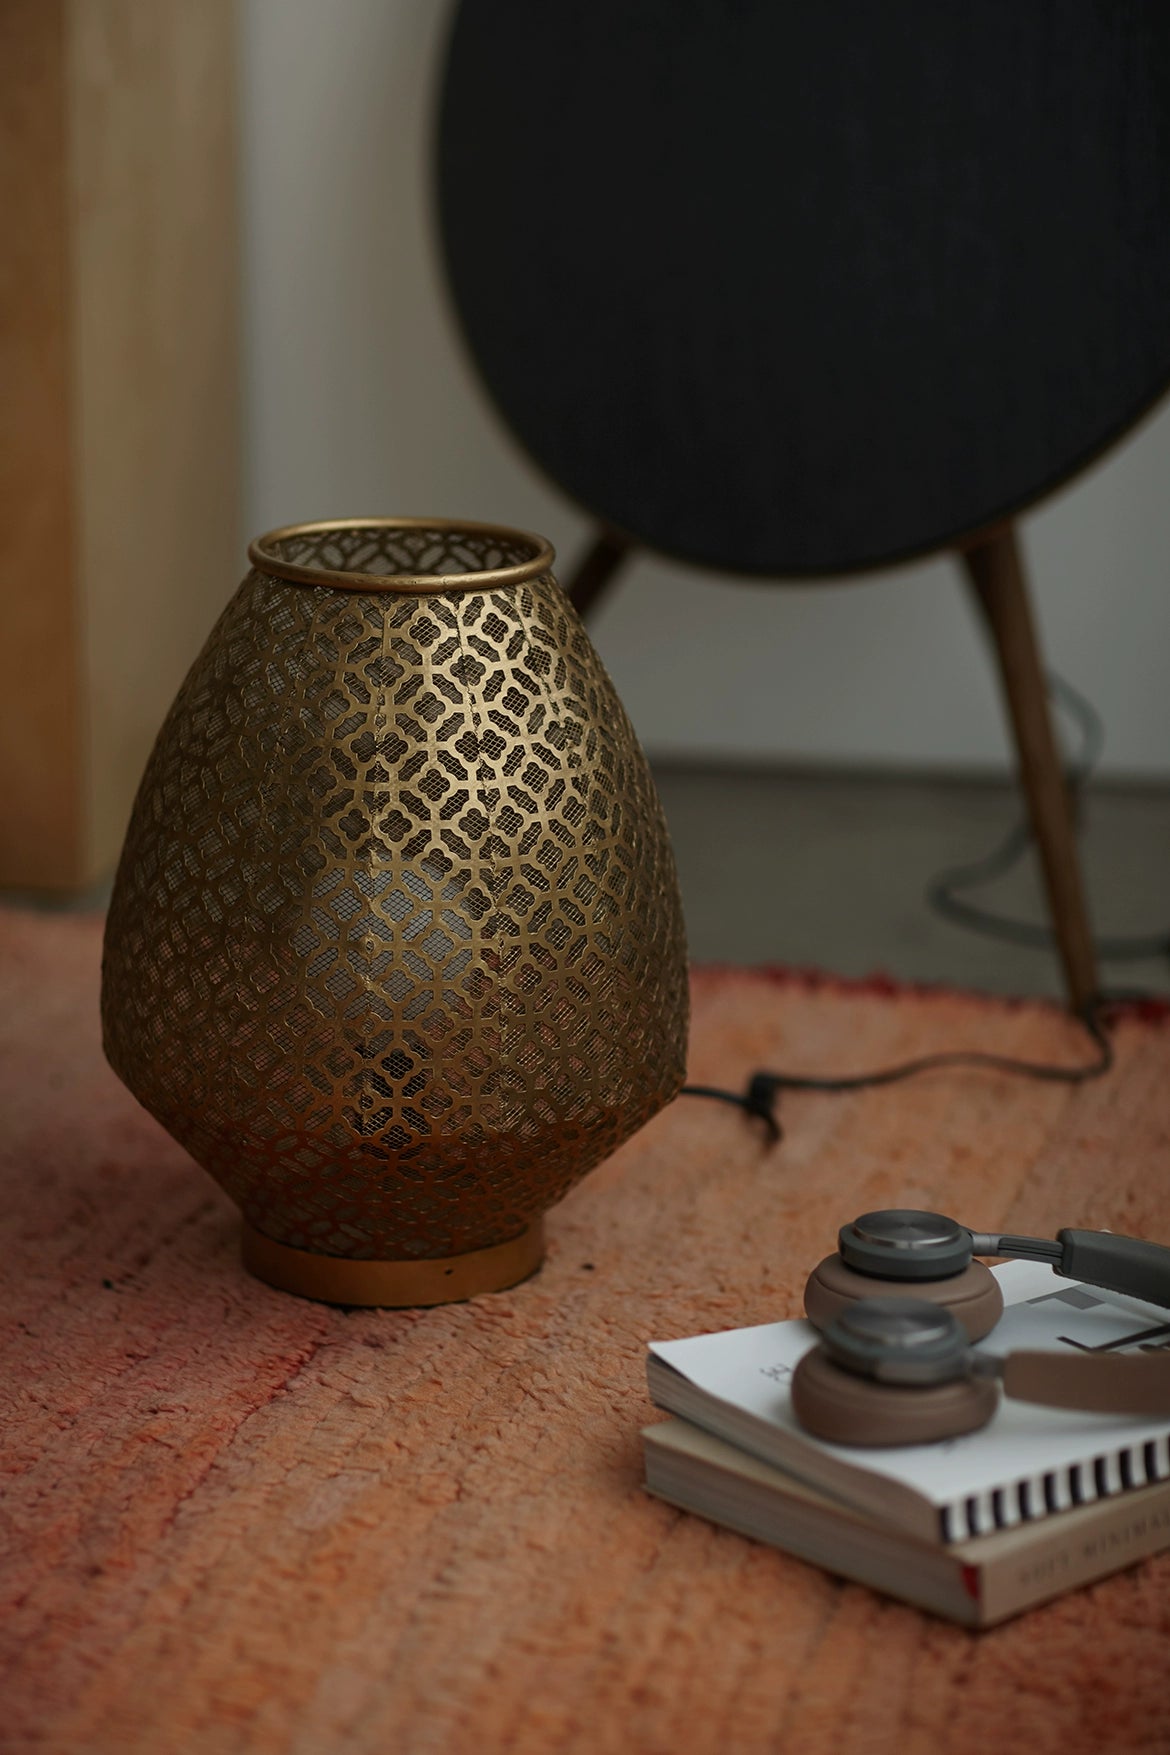 Hand Carved Table Lamp